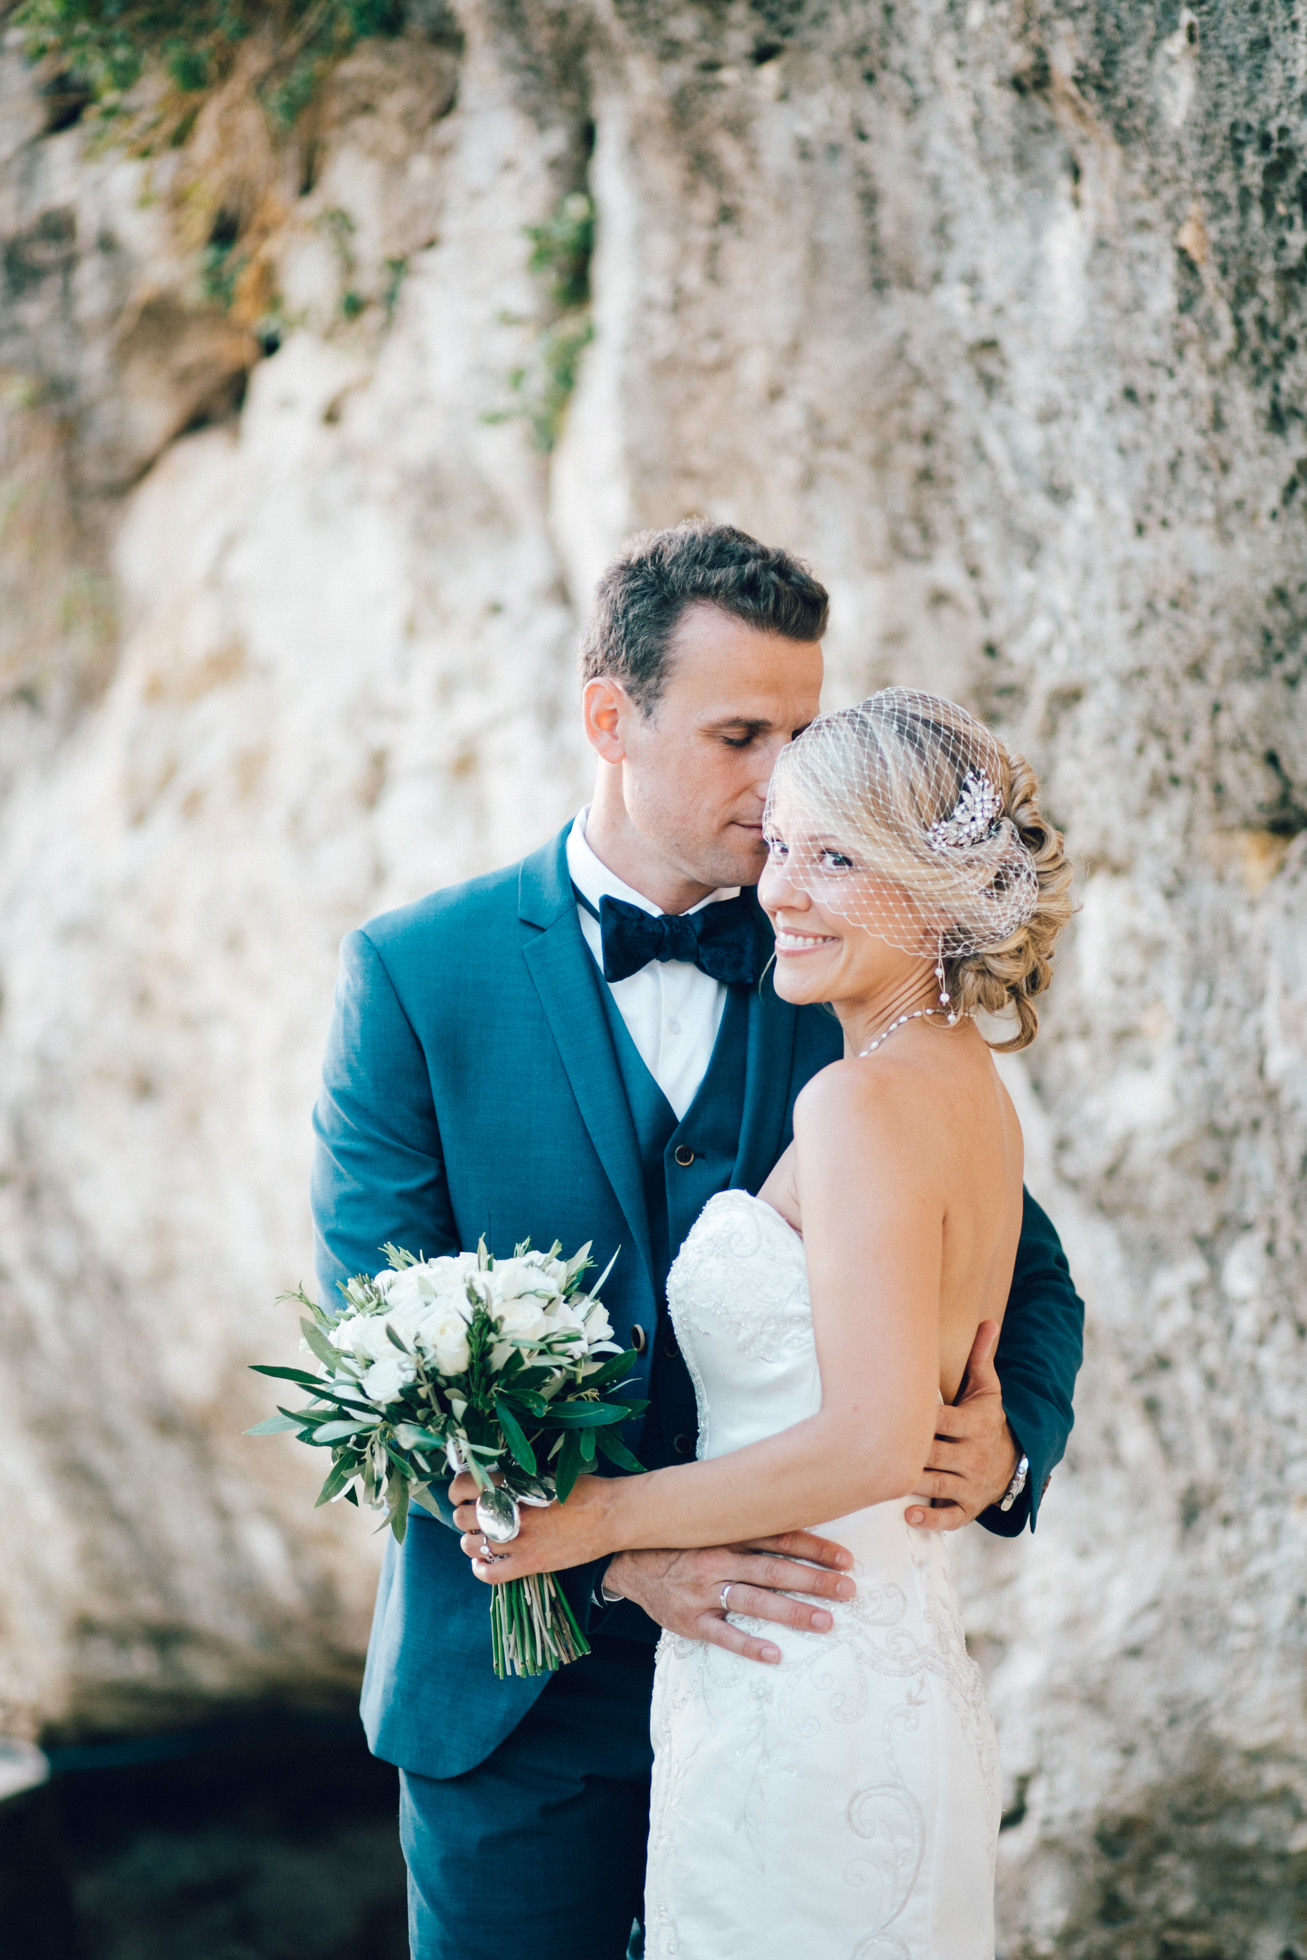 Just married! Elegant bride and groom posing for portraits on their destination wedding day in Crete island, Greece.